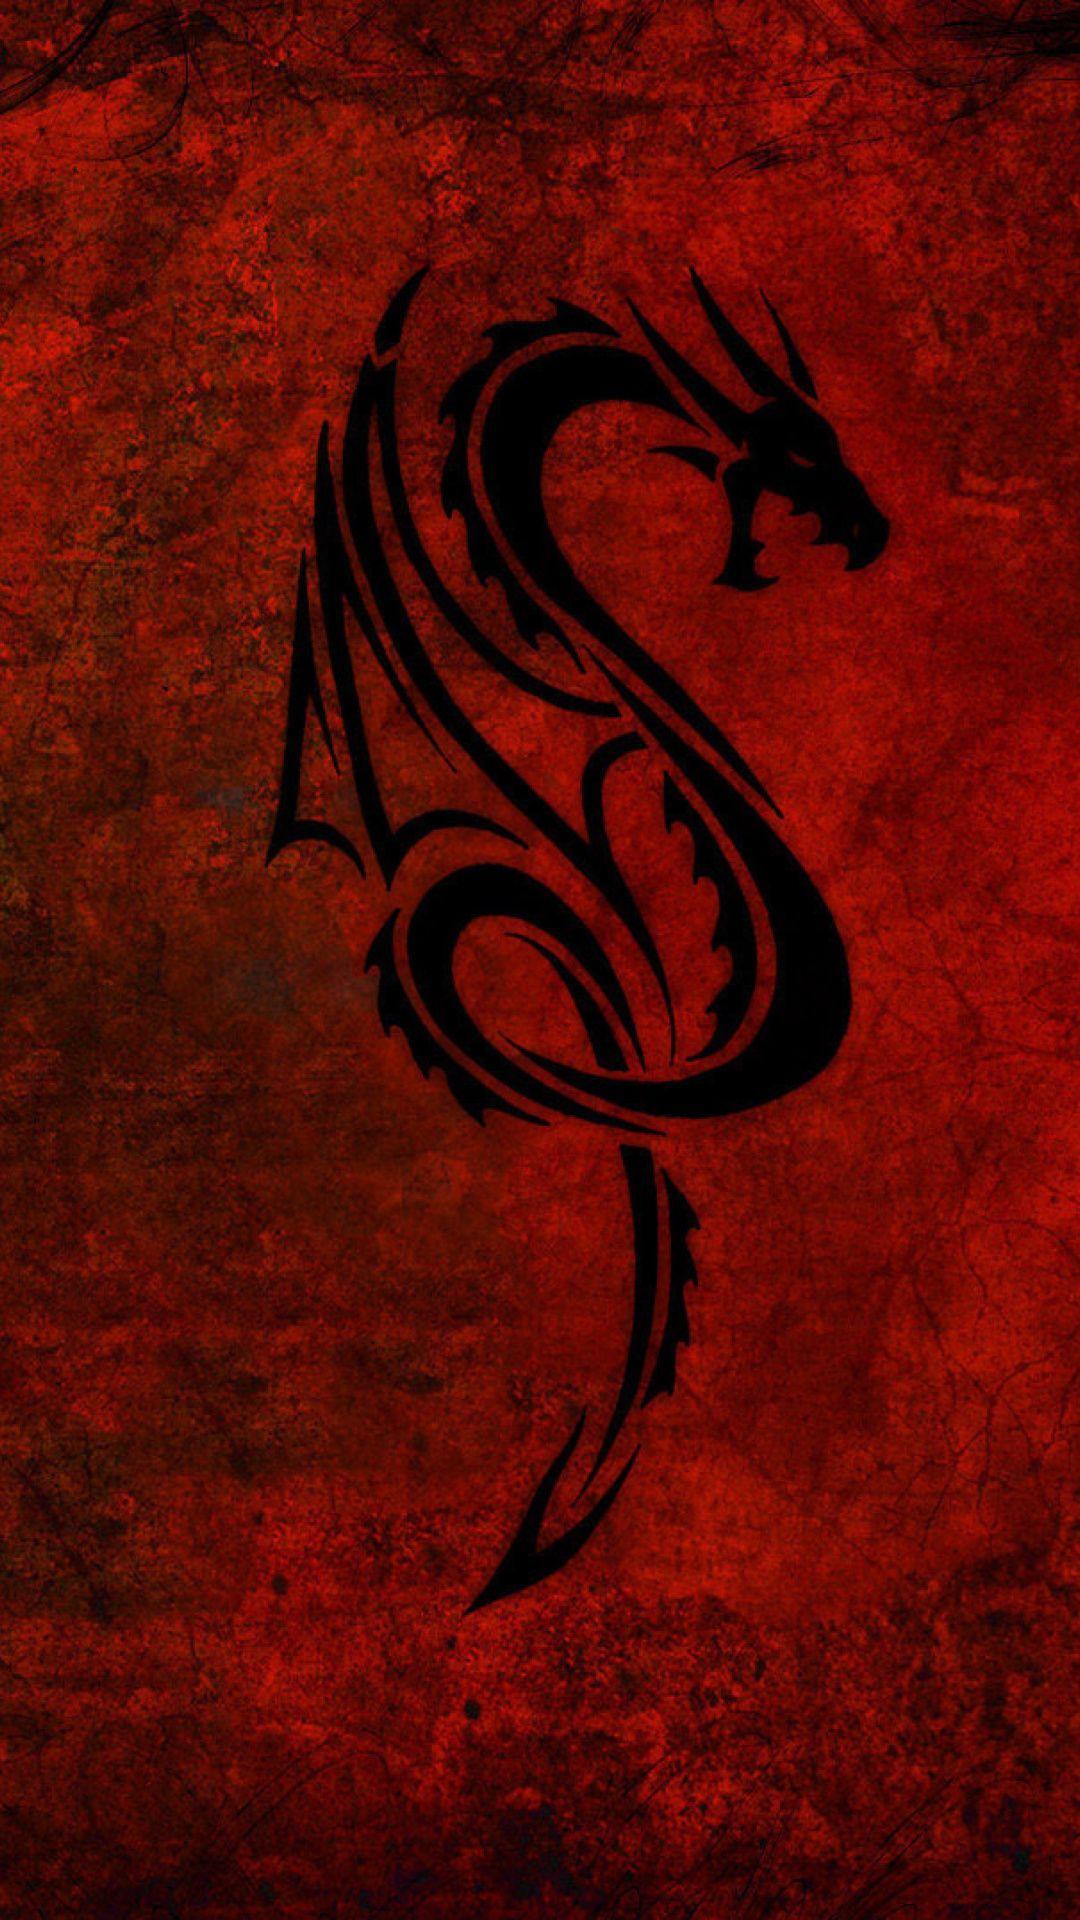 tribal wallpaper for android